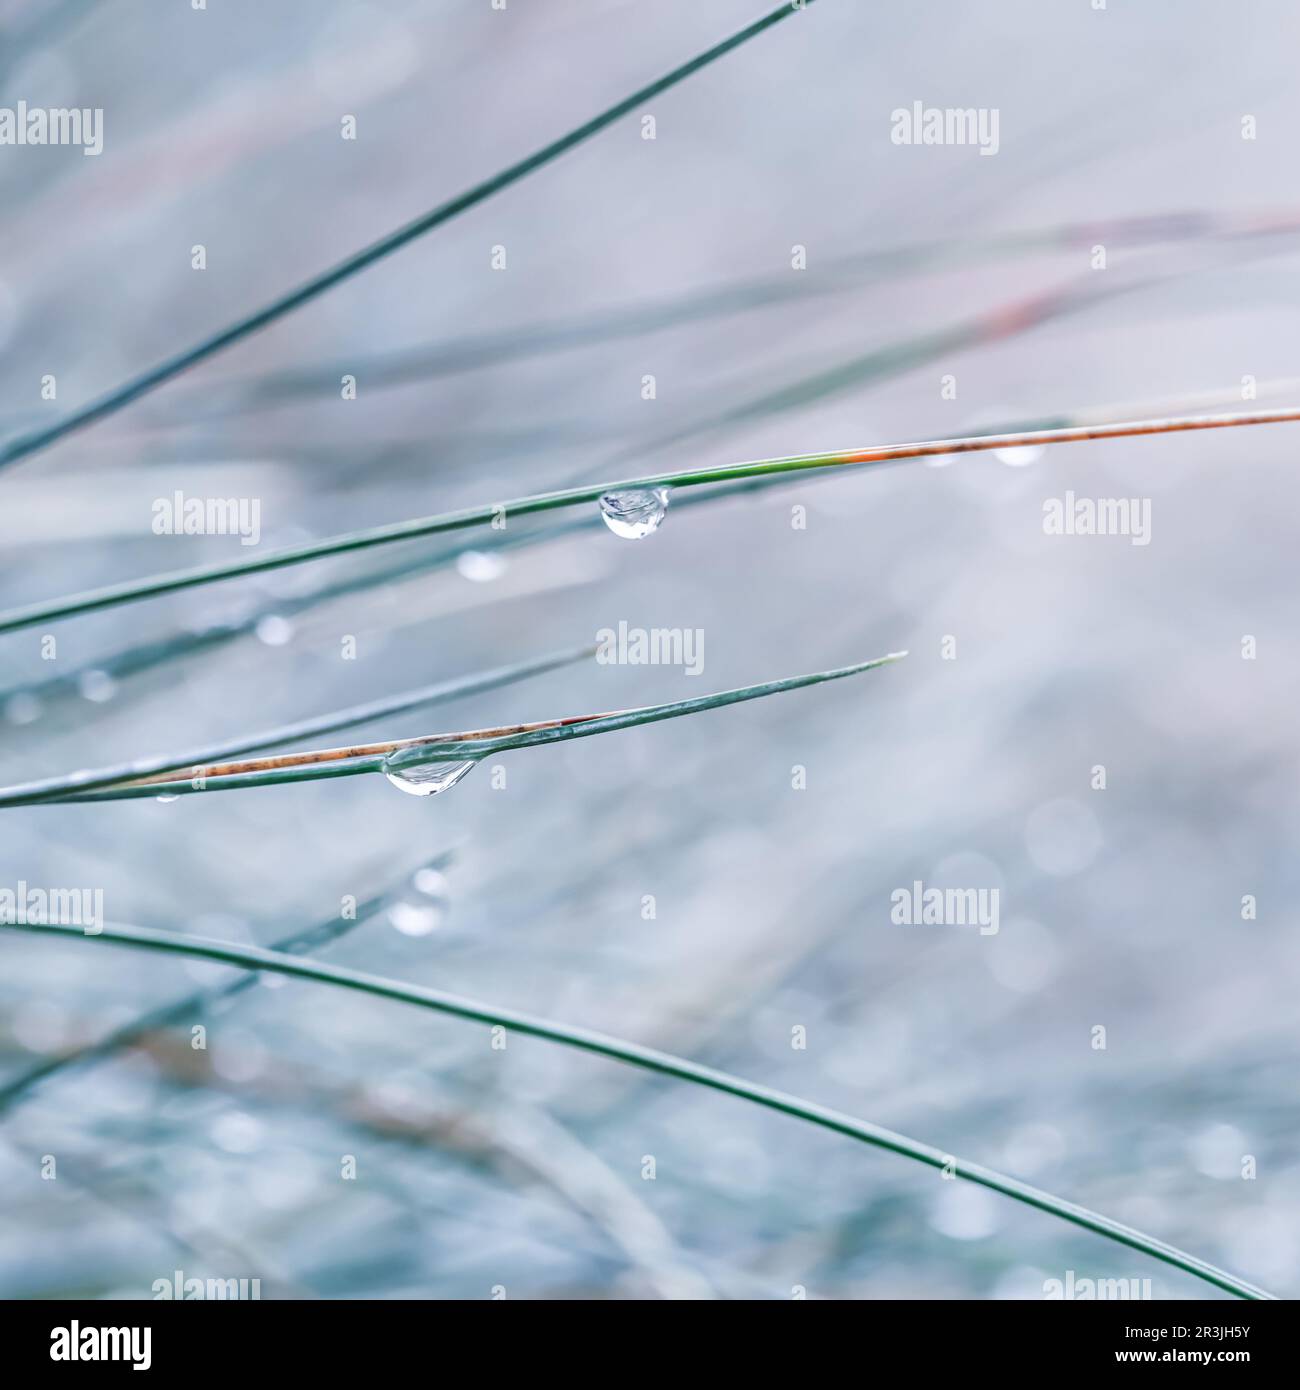 Blurred autumn background. Soft focus ornamental grass Blue Fescue with water drops. Stock Photo